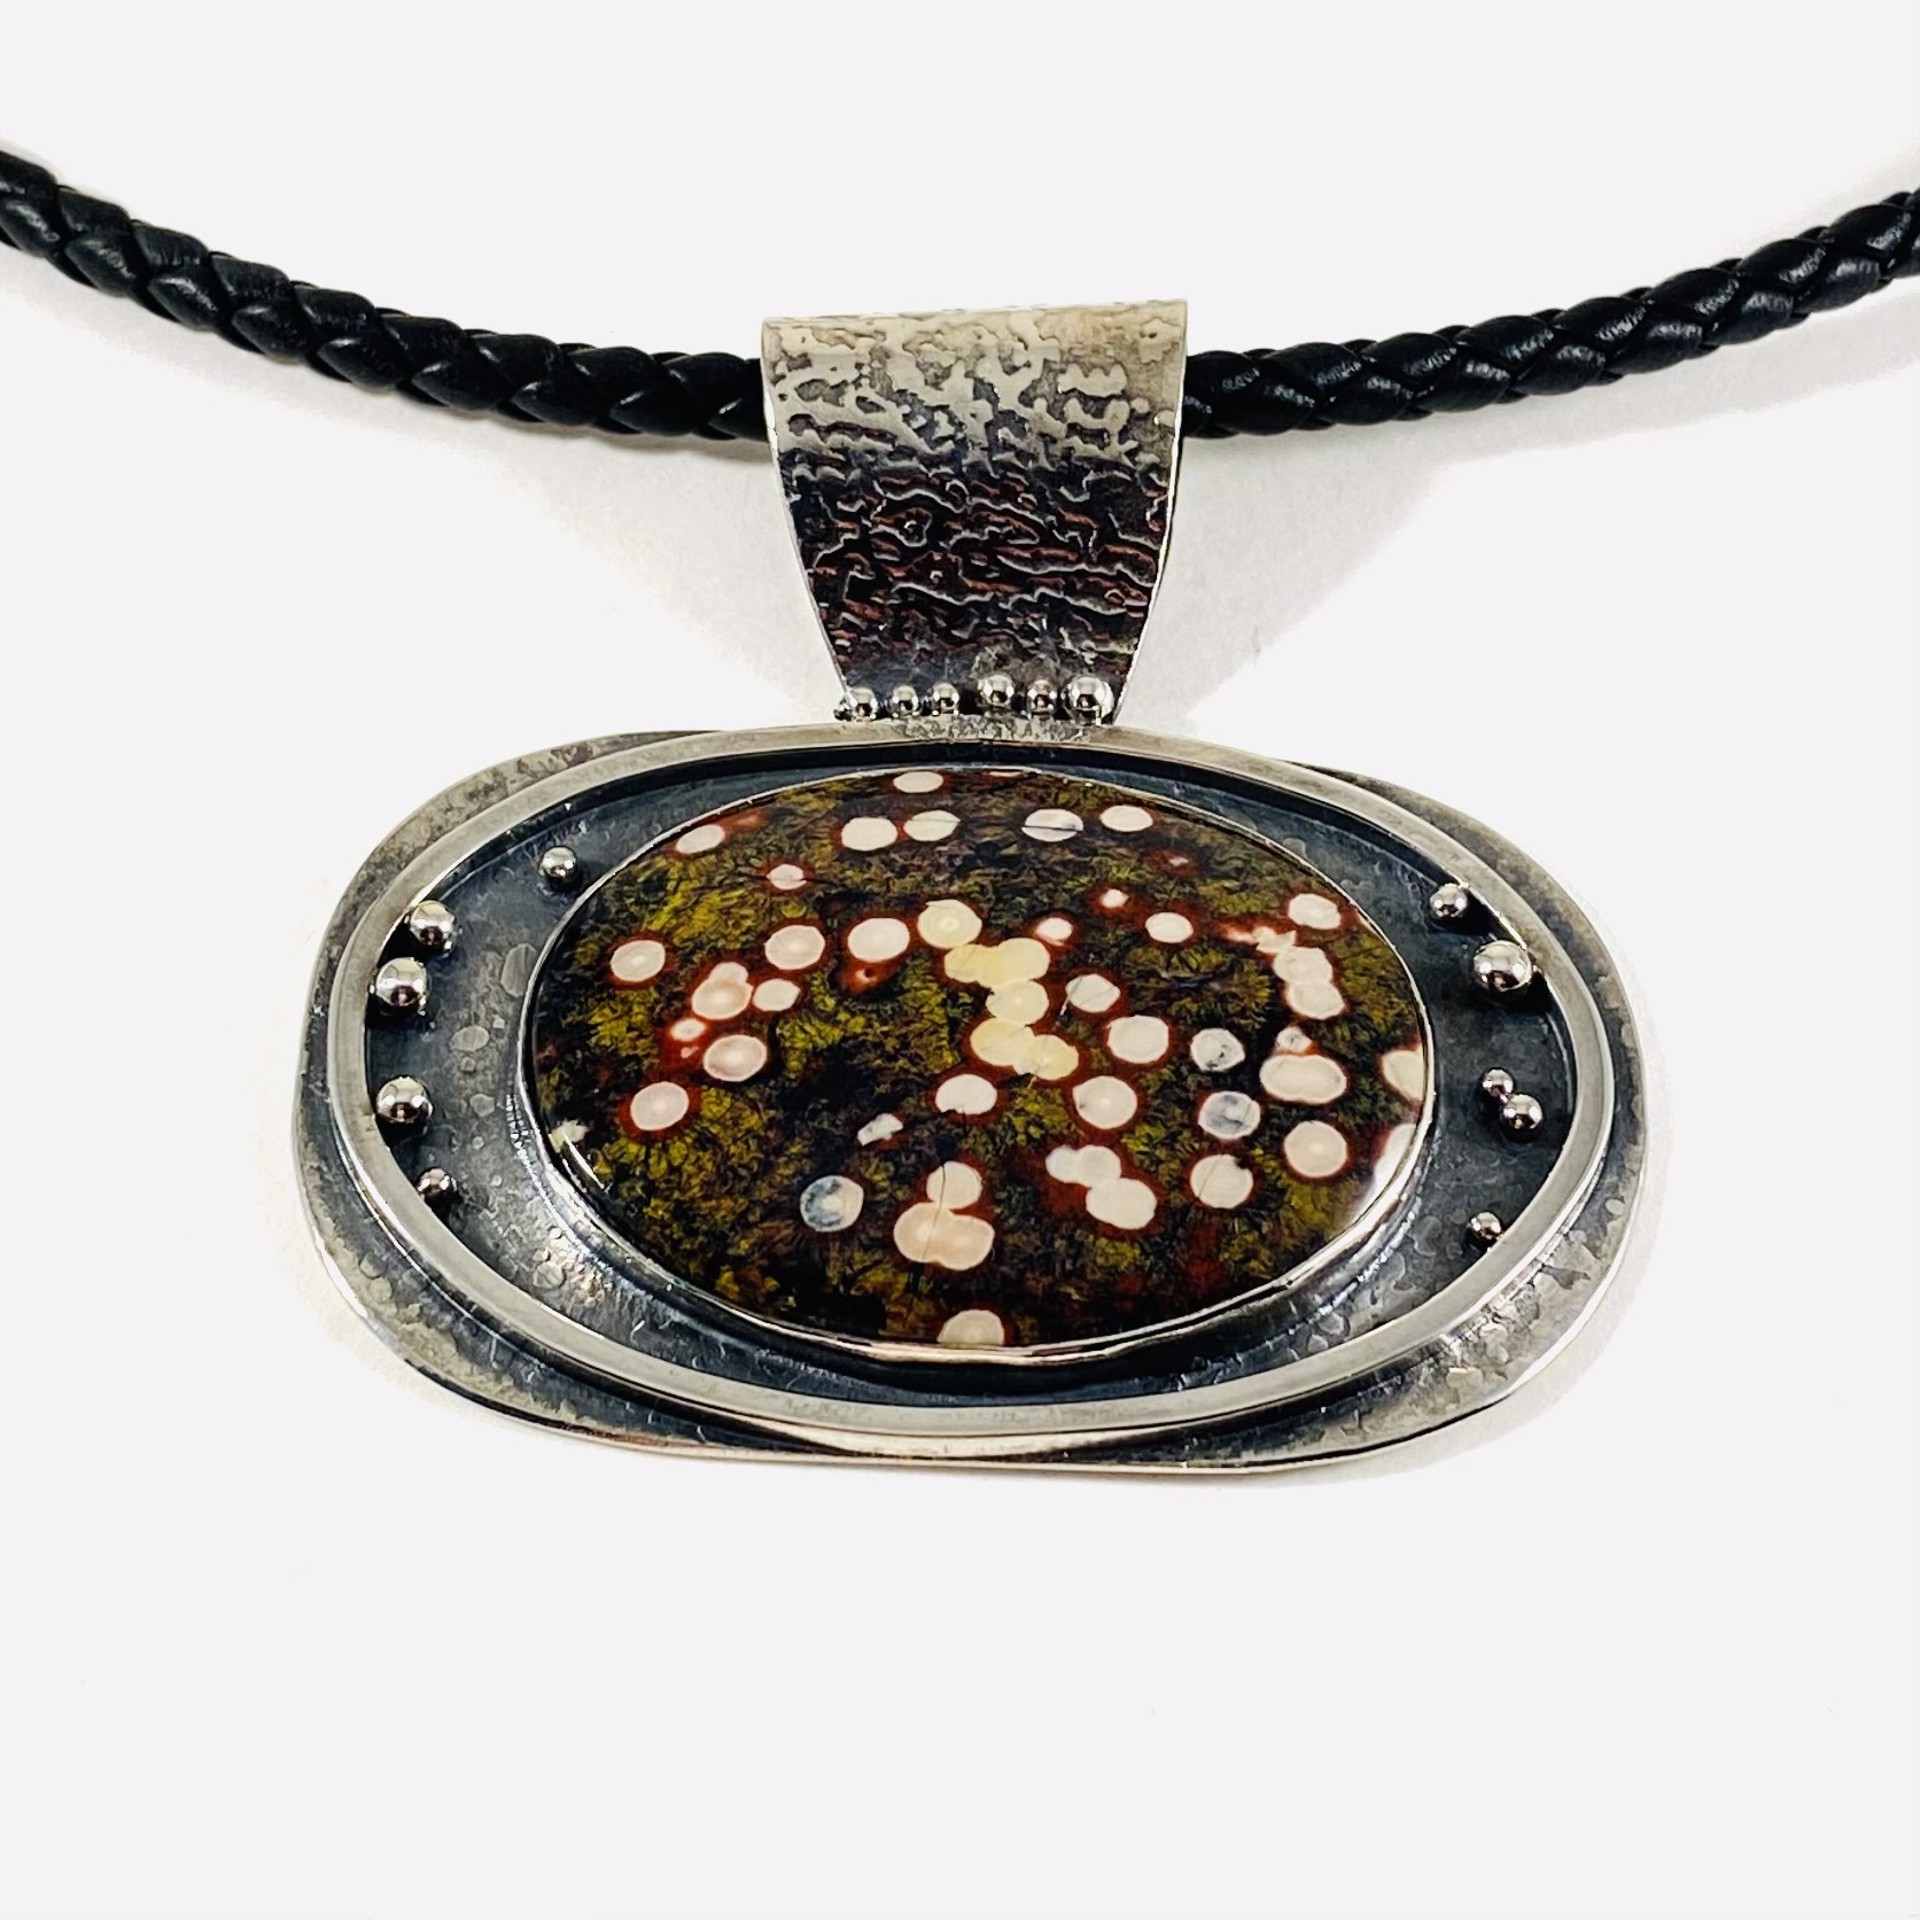 California Poppy Jasper and Sterling Pendant, Braided Black Leather Necklace AB21-28 by Anne Bivens